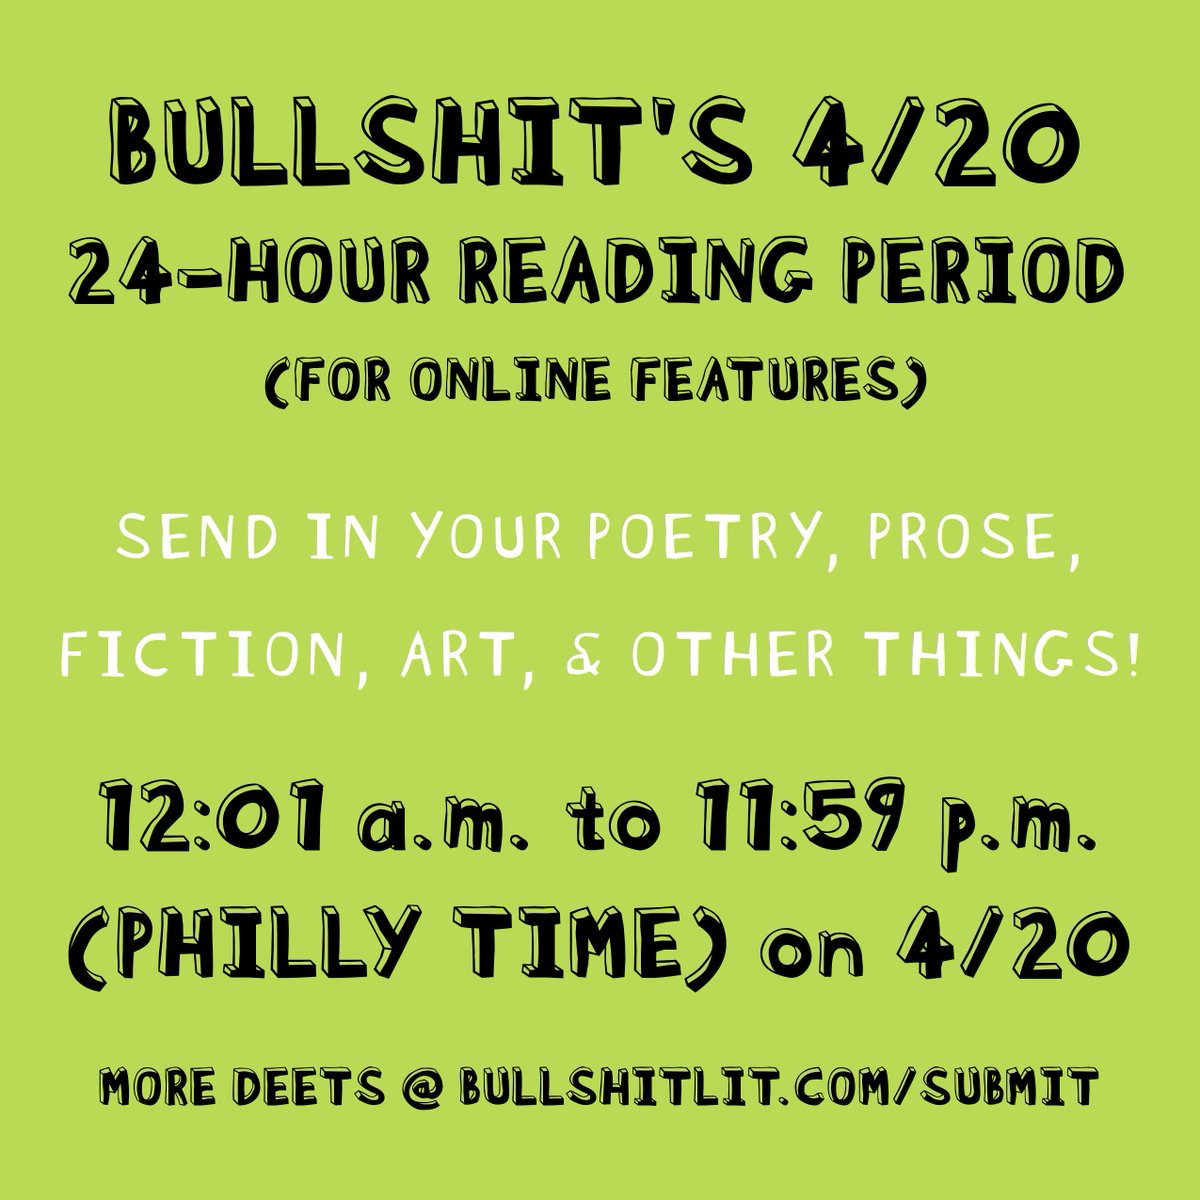 THIS SATURDAY: BULLSHIT'S 4/20 24-HOUR READING PERIOD save the date, smoke a j, write some shit, idk